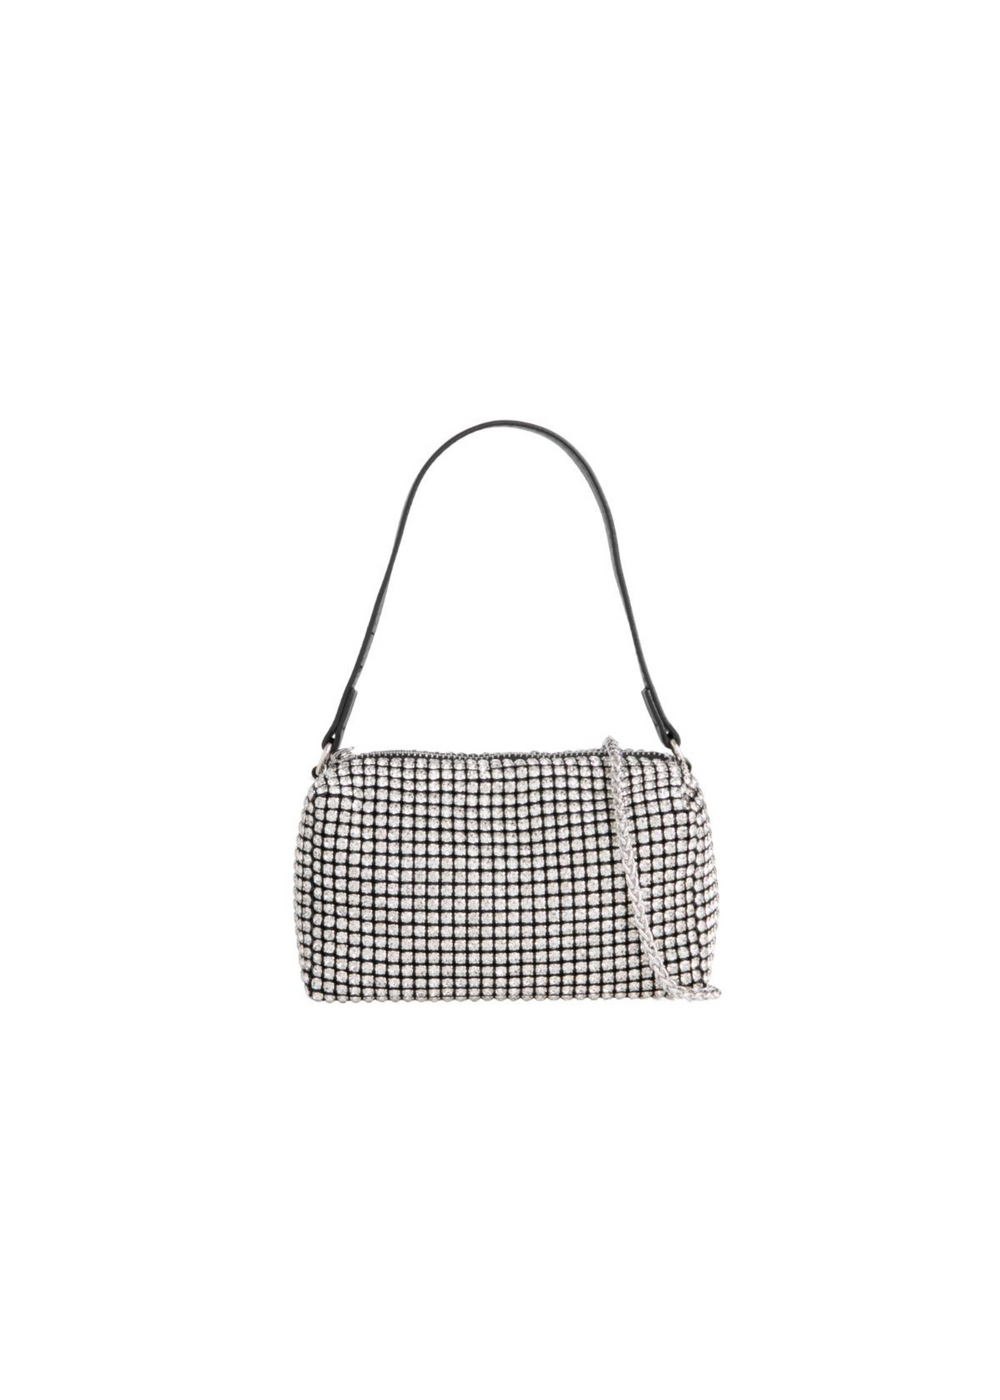 SHINE TOP HANDLE SMALL BAG WITH DIAMANTE DETAIL IN BLACK